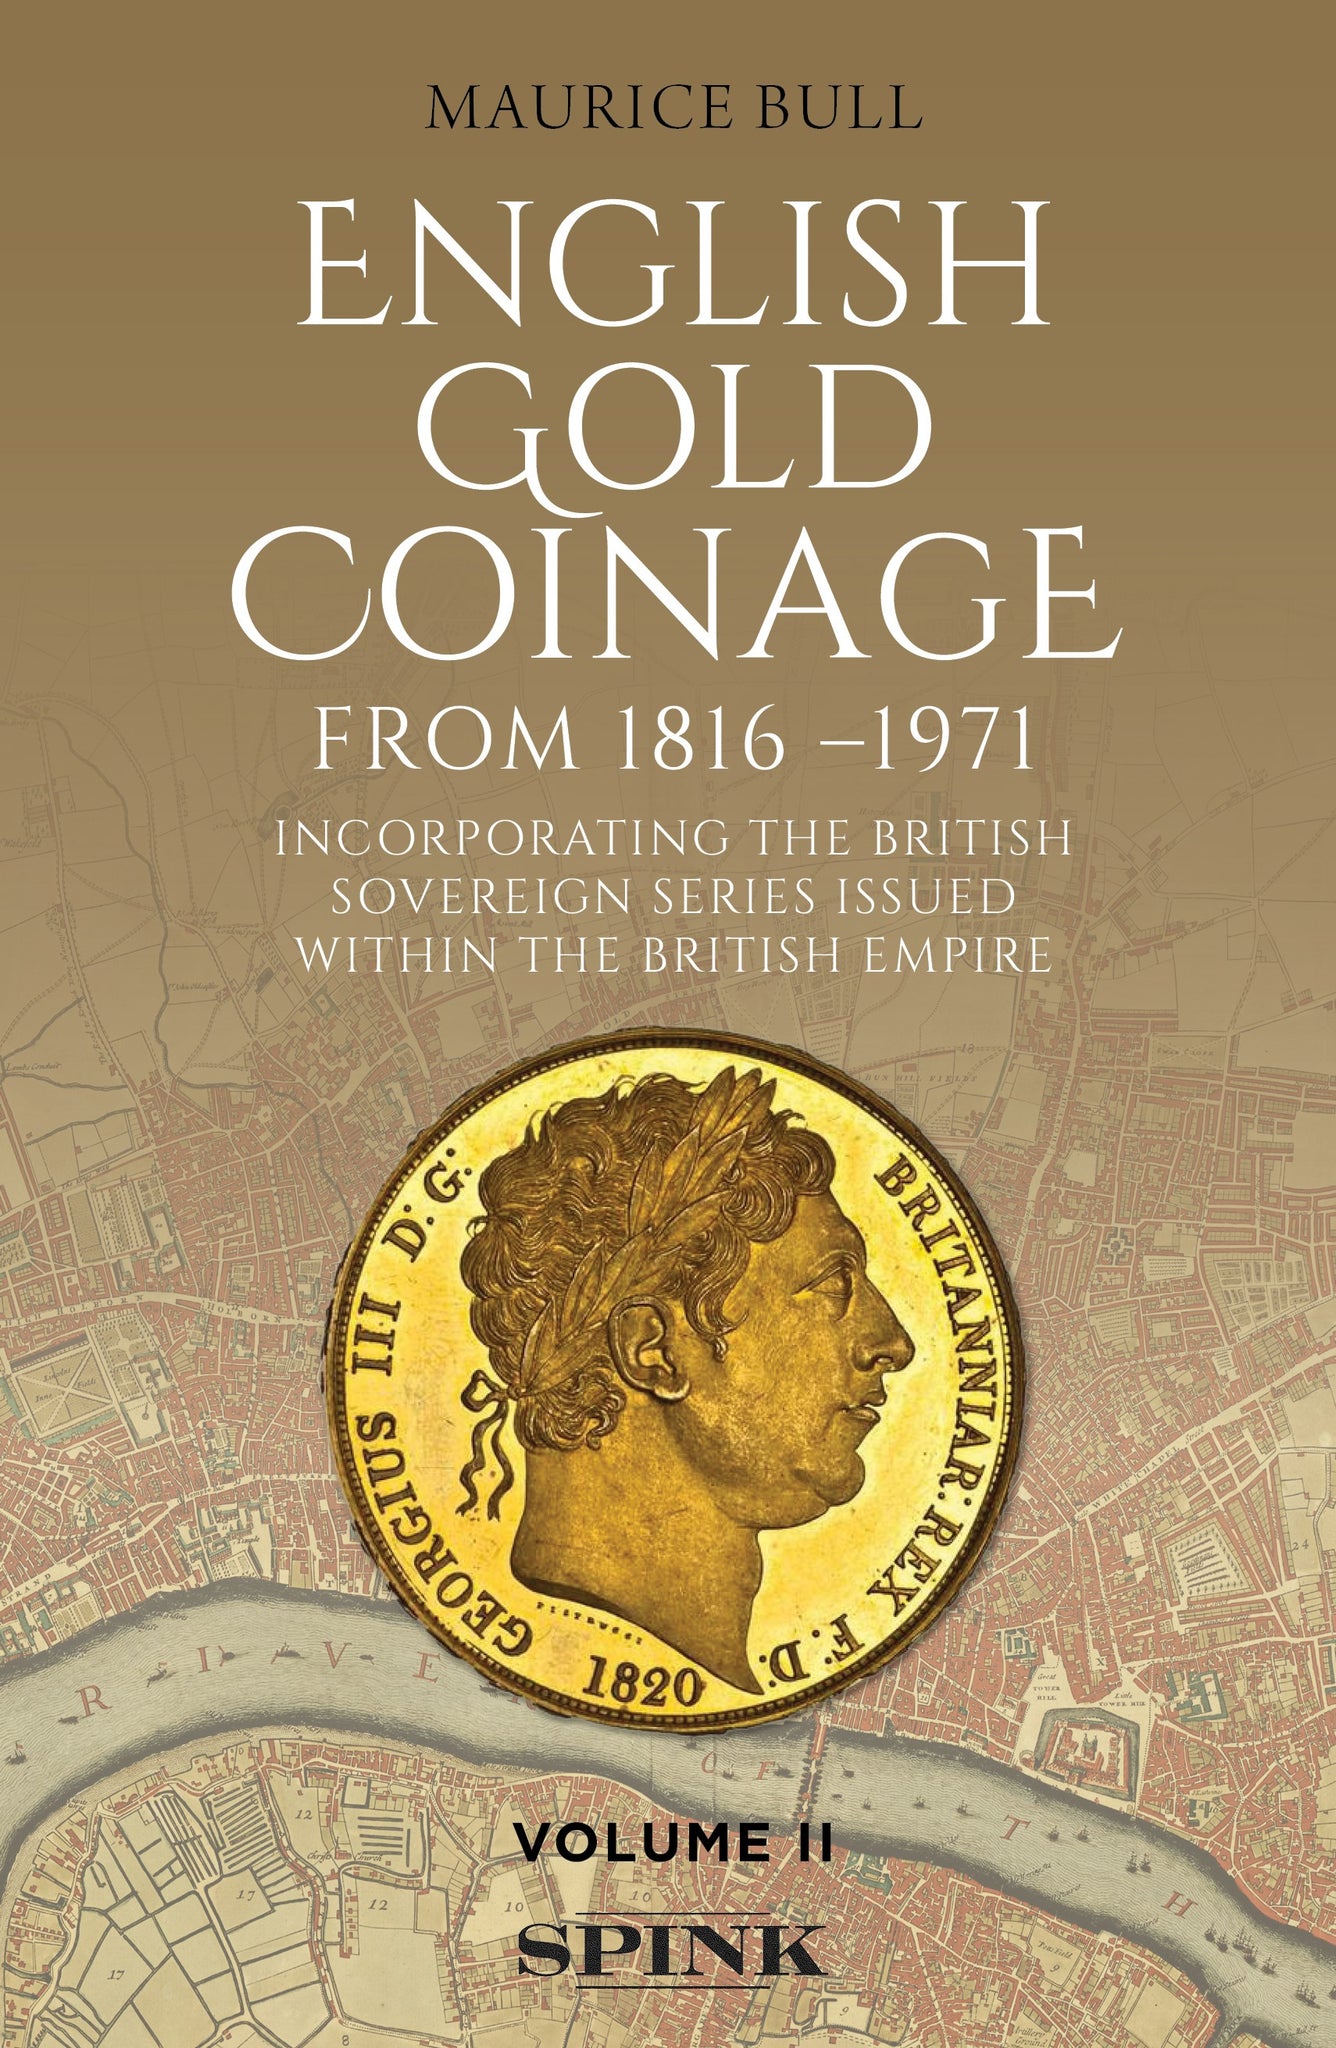 English Gold Coinage Volume II (1816-1971) by Maurice Bull